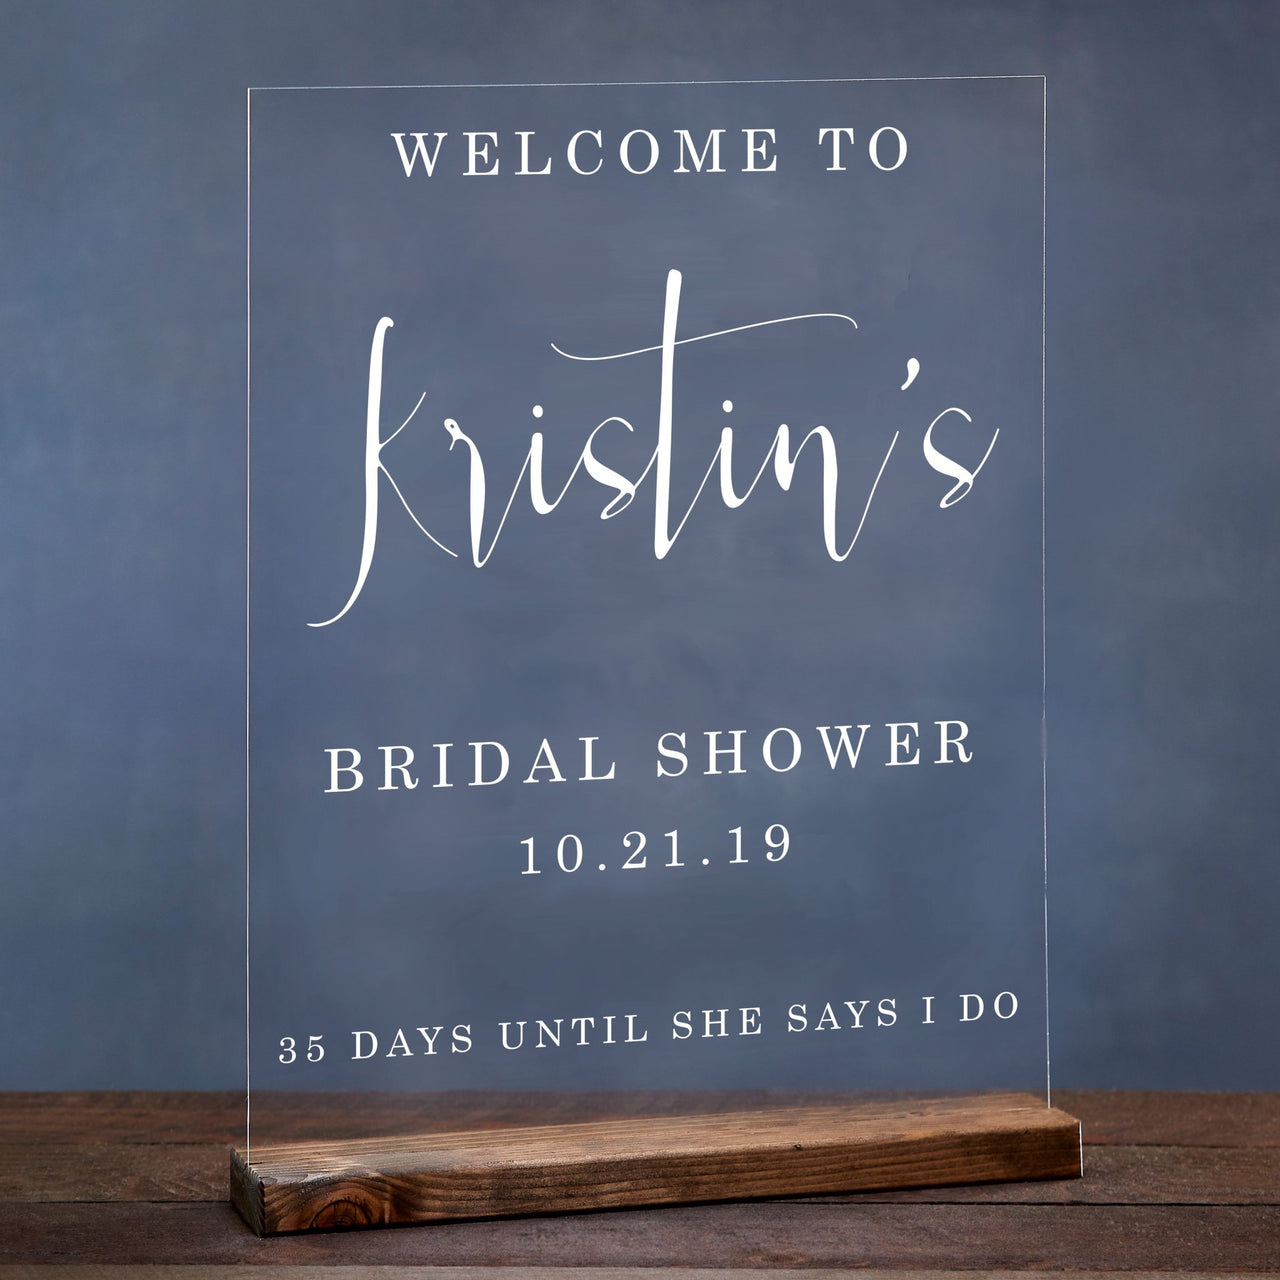 Personalized Acrylic Bridal Shower Welcome Sign - Rich Design Co